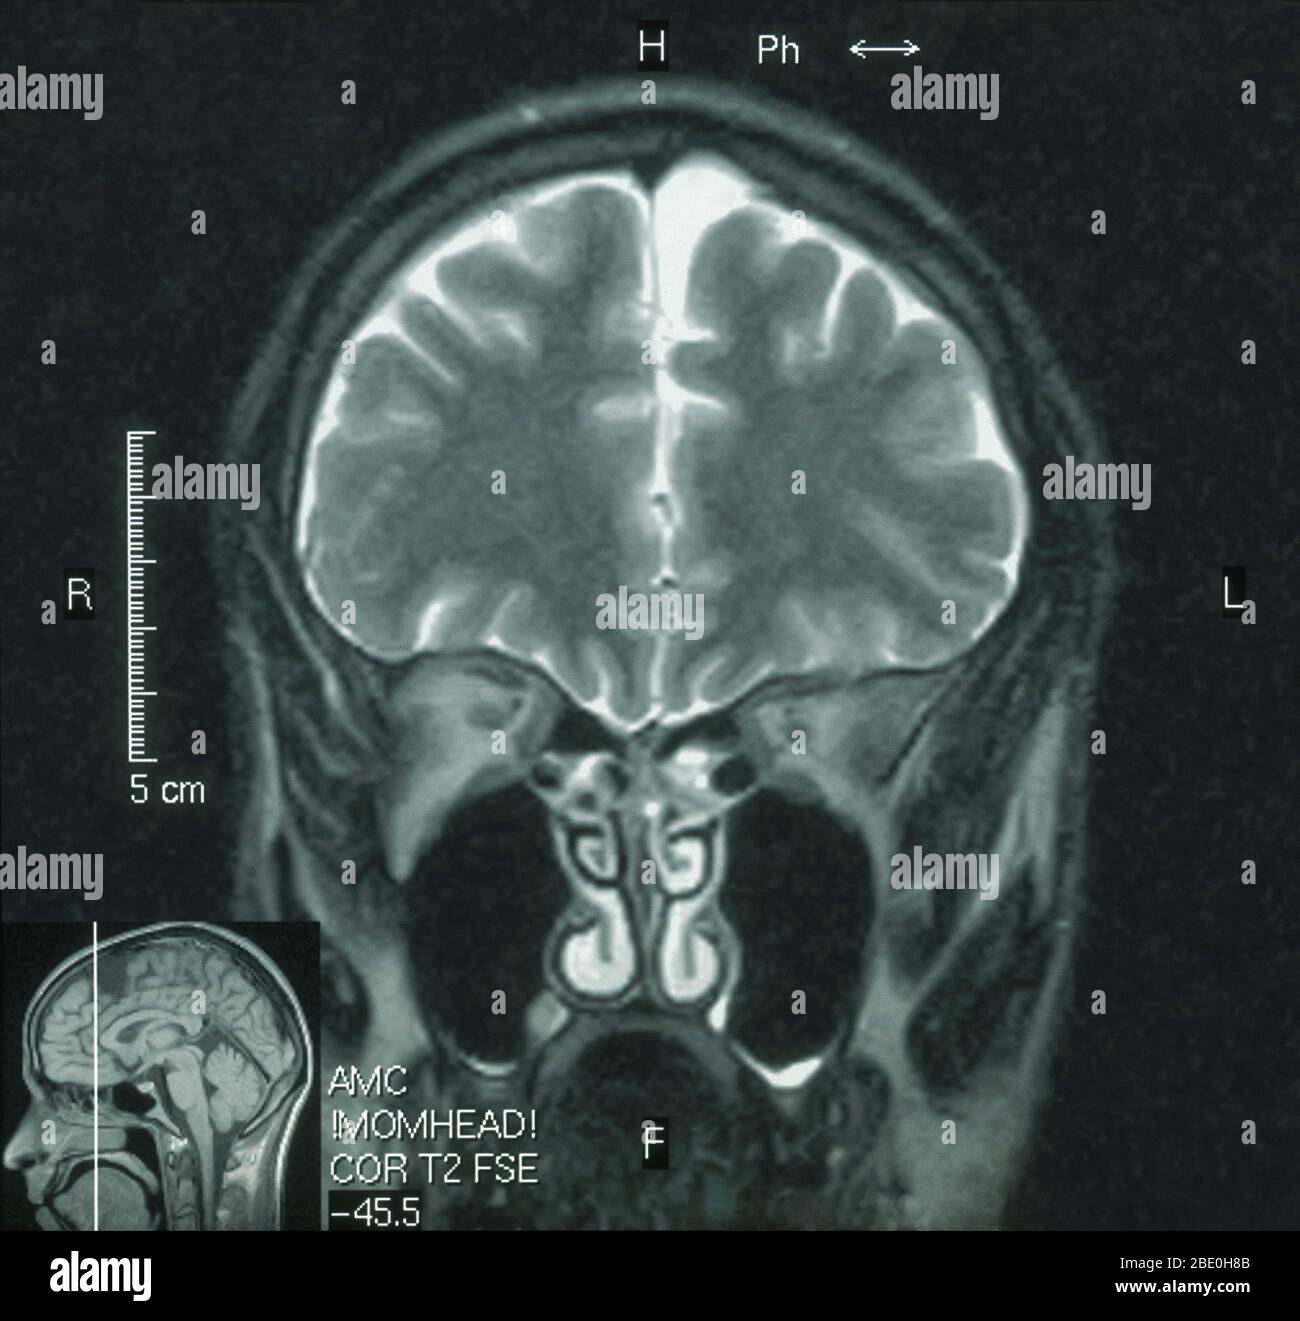 MRI of the brain (sagittal view) of a 26 year old male. The MRI was taken as a result of head injury in a car accident. Diagnosis from the MRI's is a small arachnoid cyst in the parasagittal anterior left frontal region. All other aspects appear normal. Stock Photo